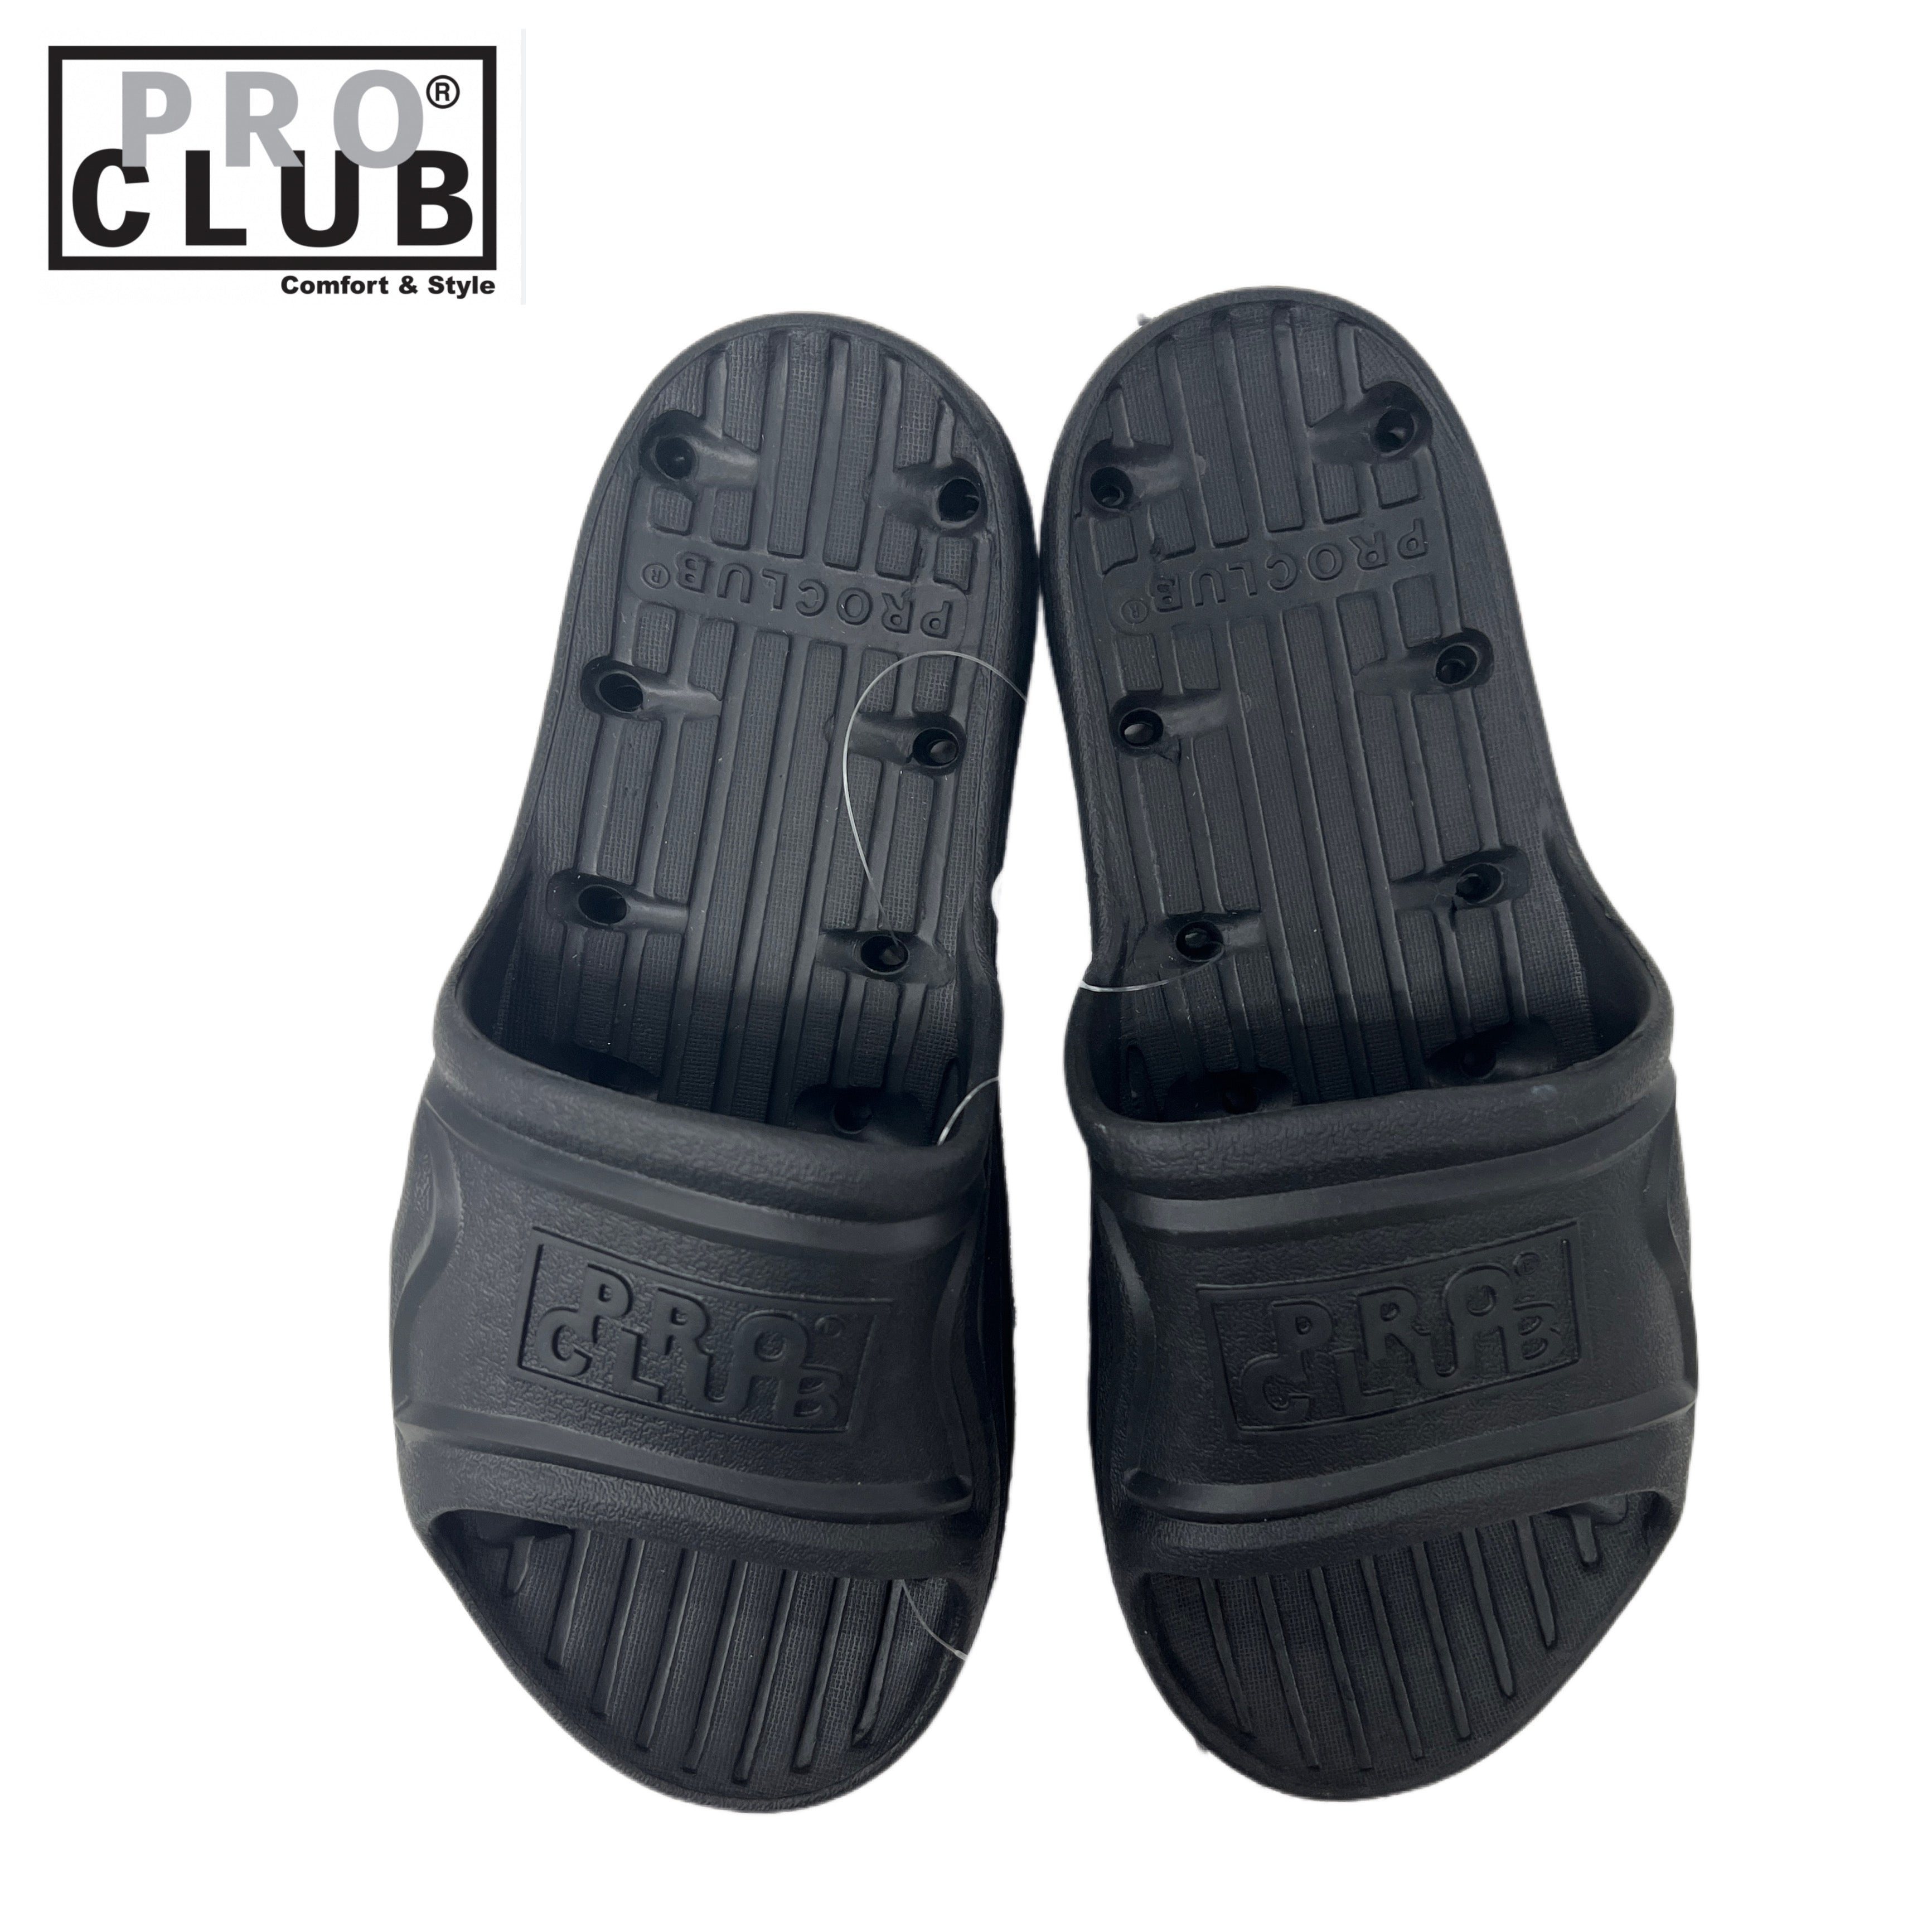 Pro Club Shower Slippers